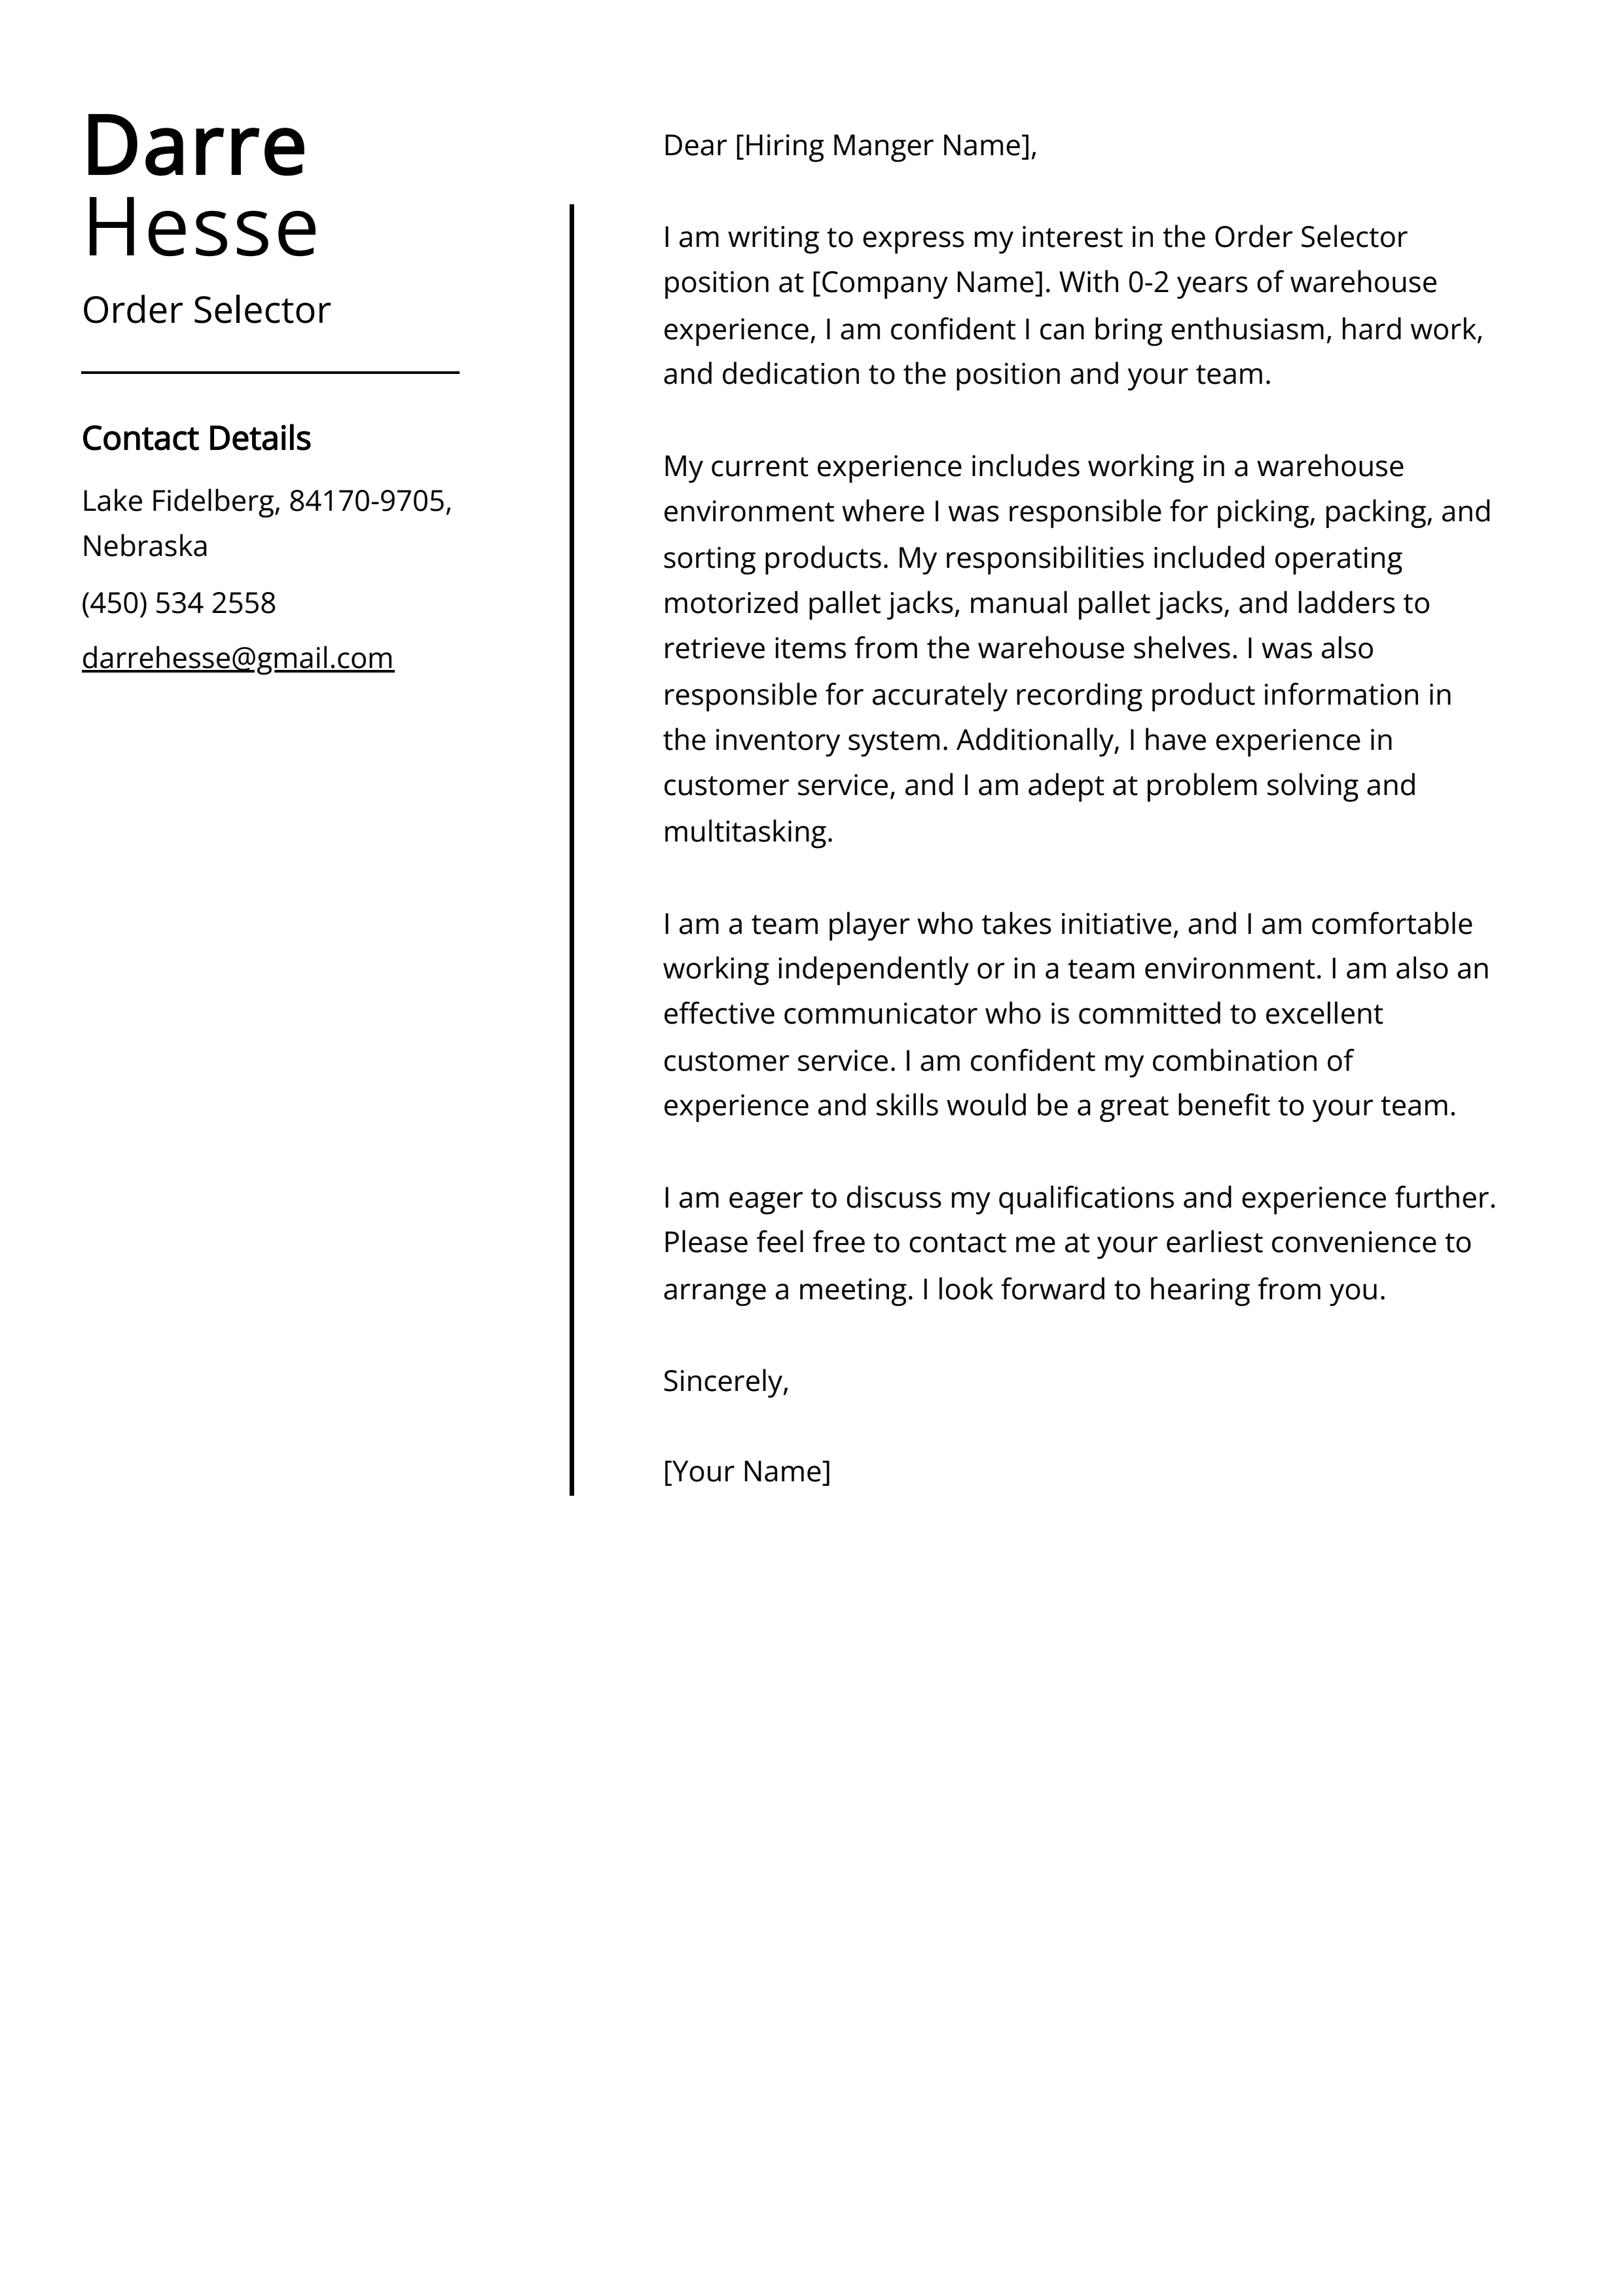 Order Selector Cover Letter Example